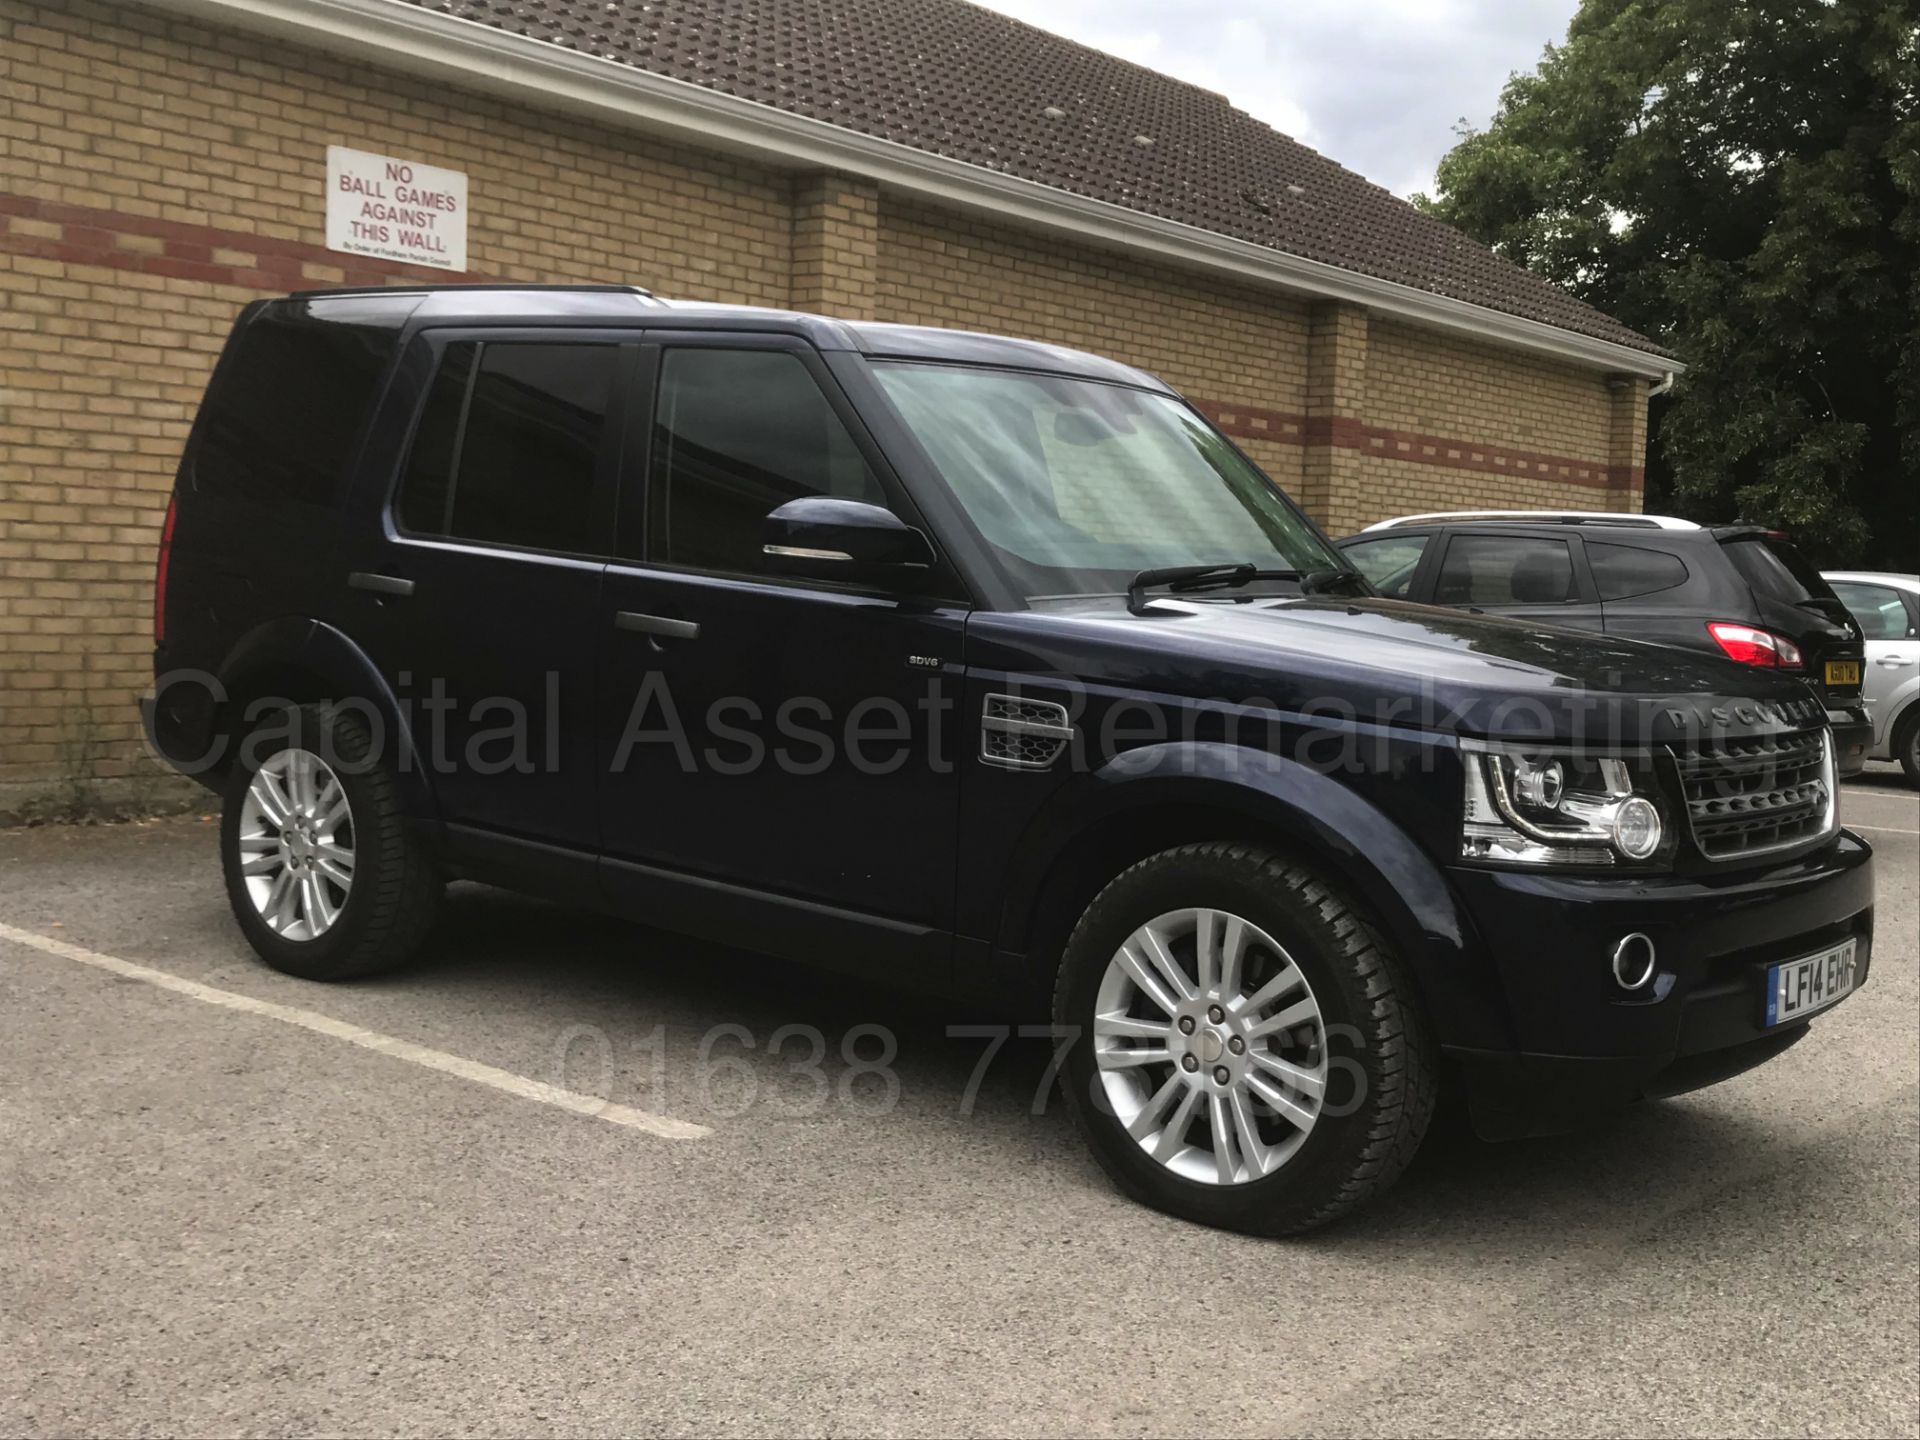 (On Sale) LAND ROVER DISCOVERY *XS EDITION* (2014) '3.0 SDV6 - 225 BHP- 8 SPEED AUTO' *MASSIVE SPEC* - Image 2 of 48